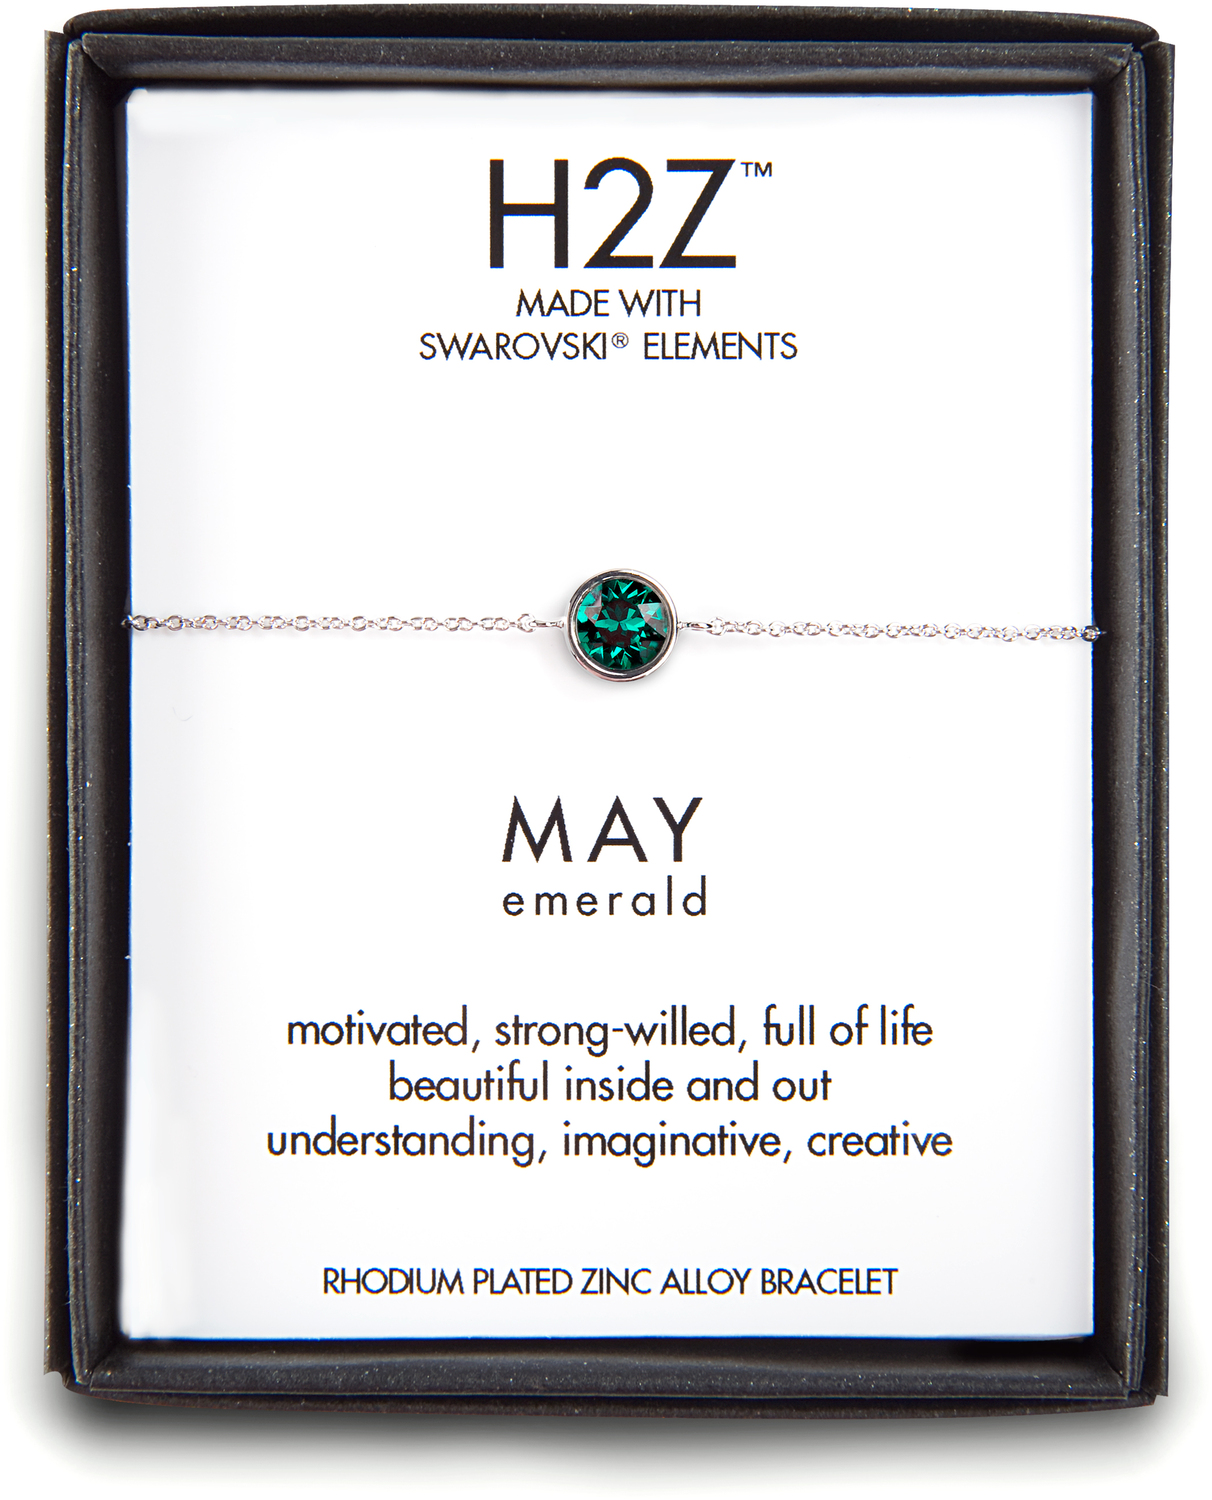 Liza Birthstone May Emerald by H2Z Made with Swarovski Elements - Liza Birthstone May Emerald - 6.5"-7.625" Crystal Bracelet made from Swarovski Elements